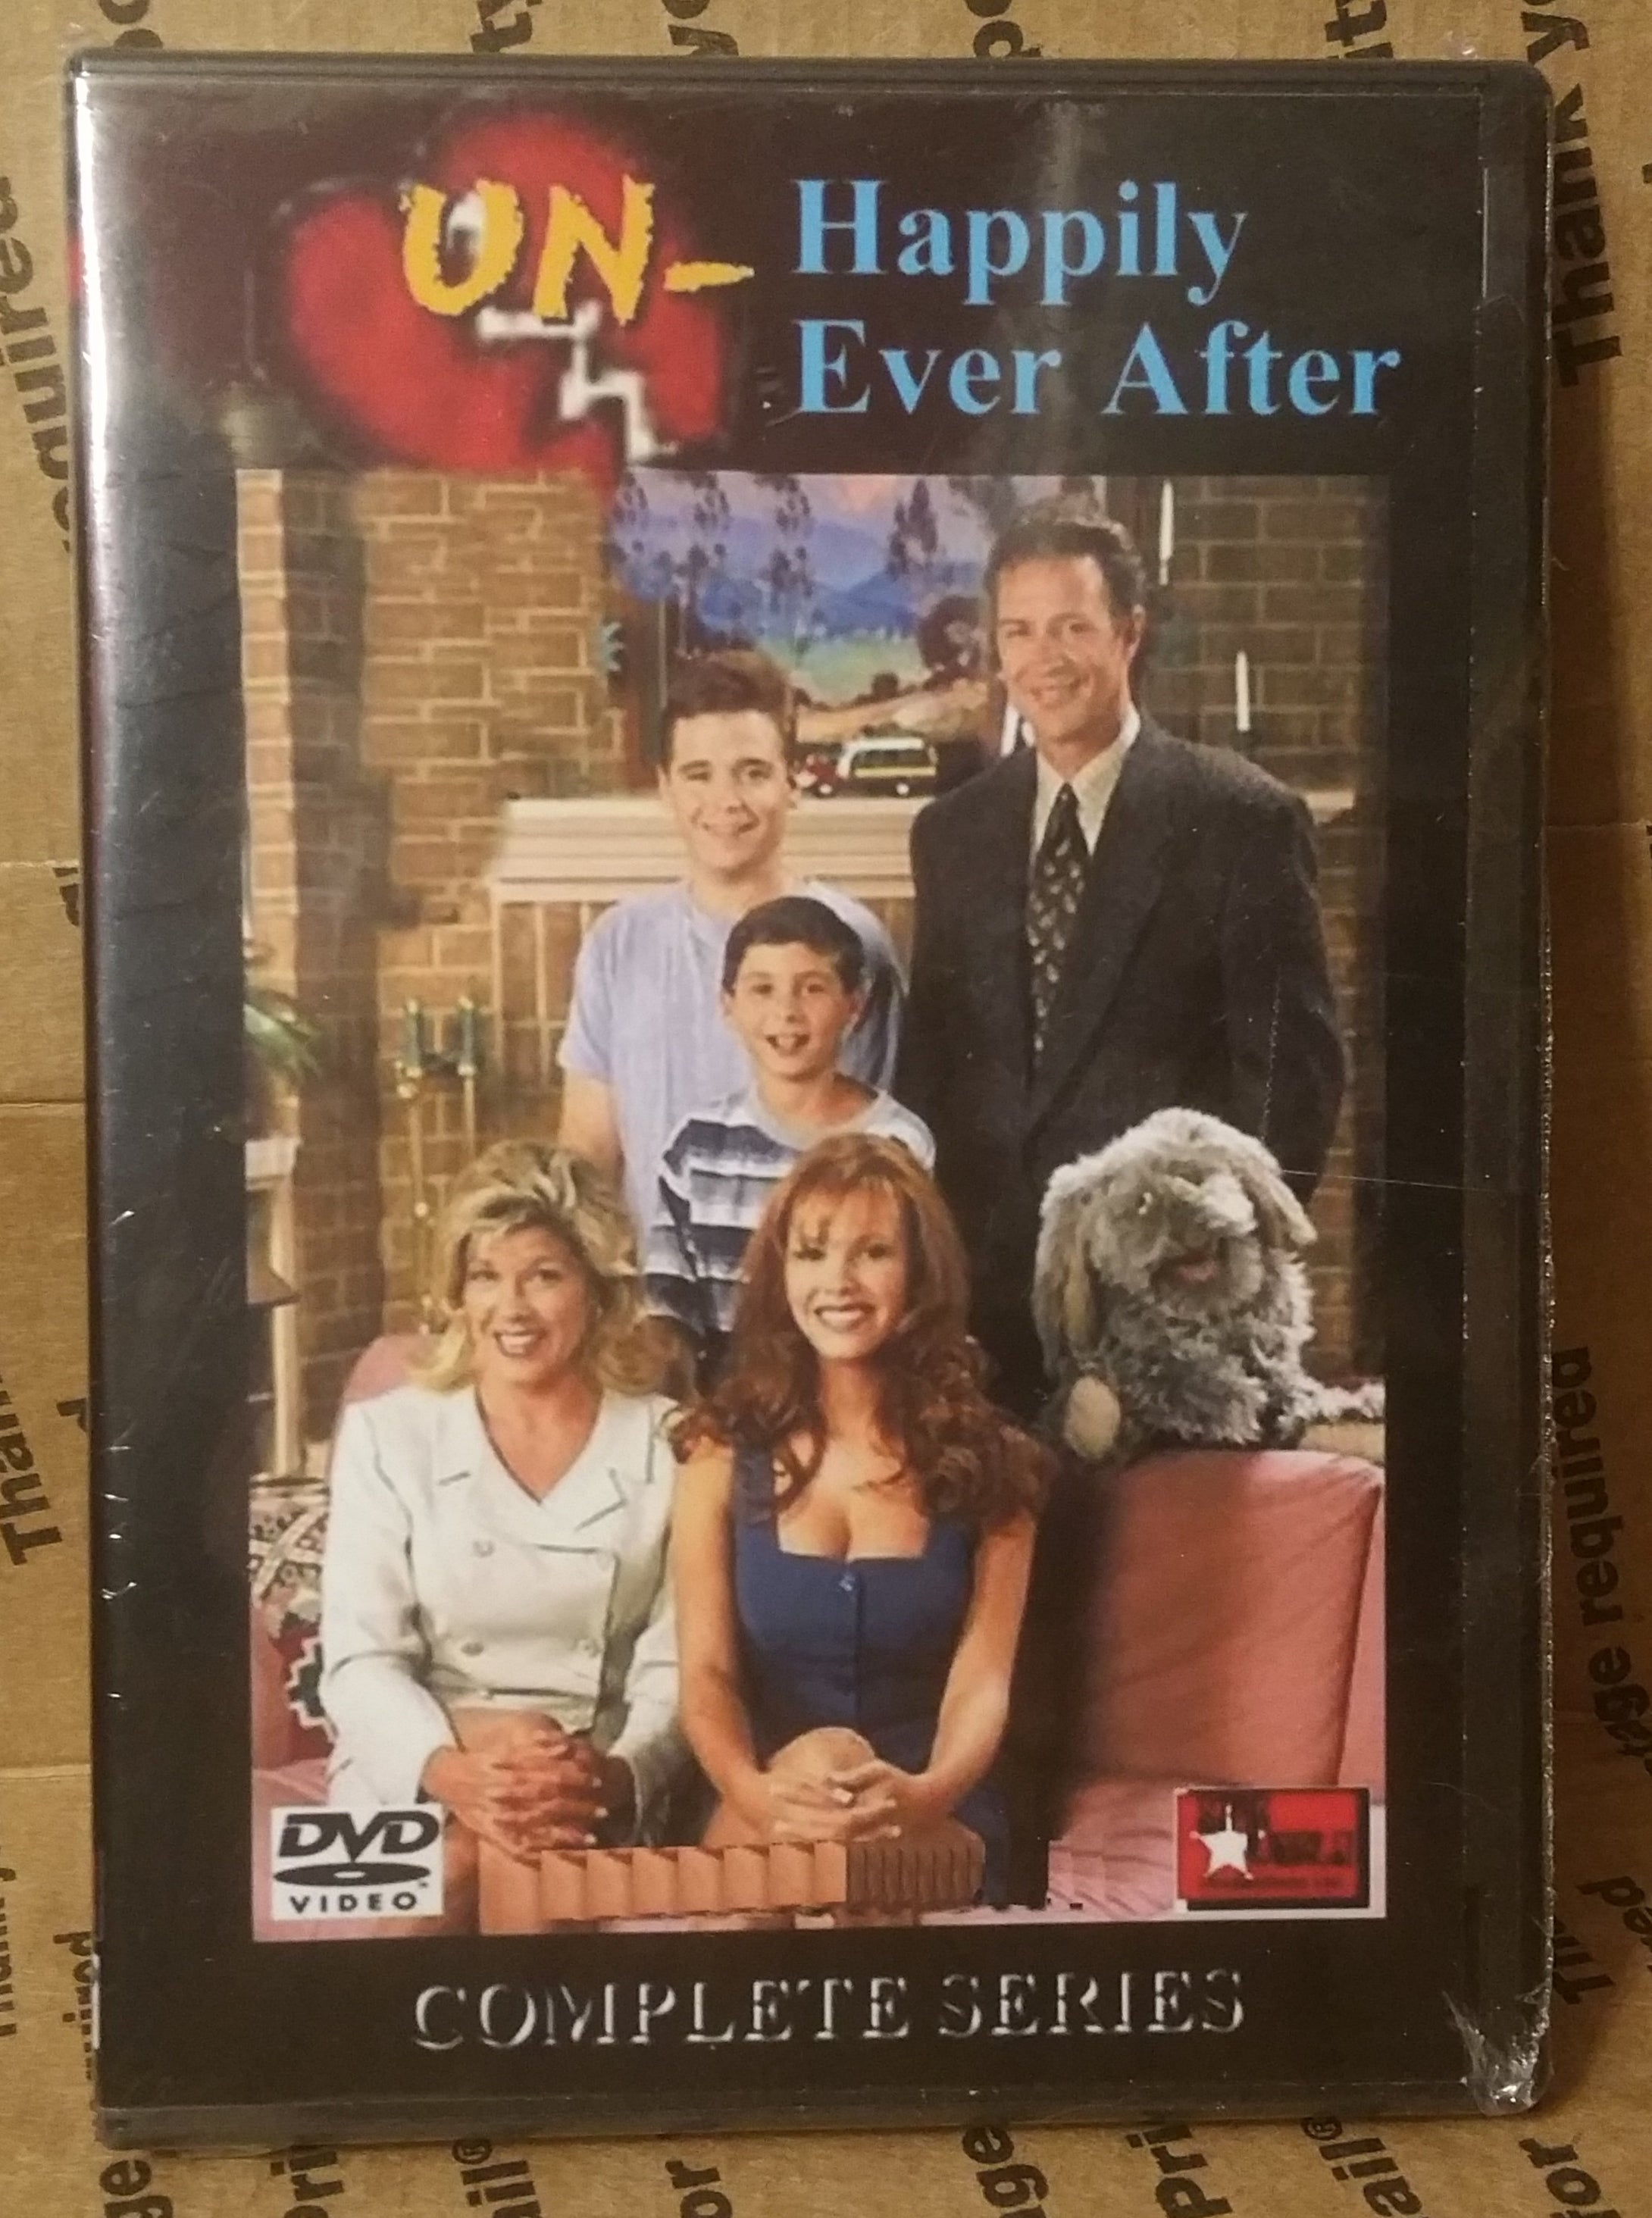 Unhappily Ever After 1995 The Complete Tv Series On 9 DVD's 100 Episodes Geoffrey Pierson Nikki Cox